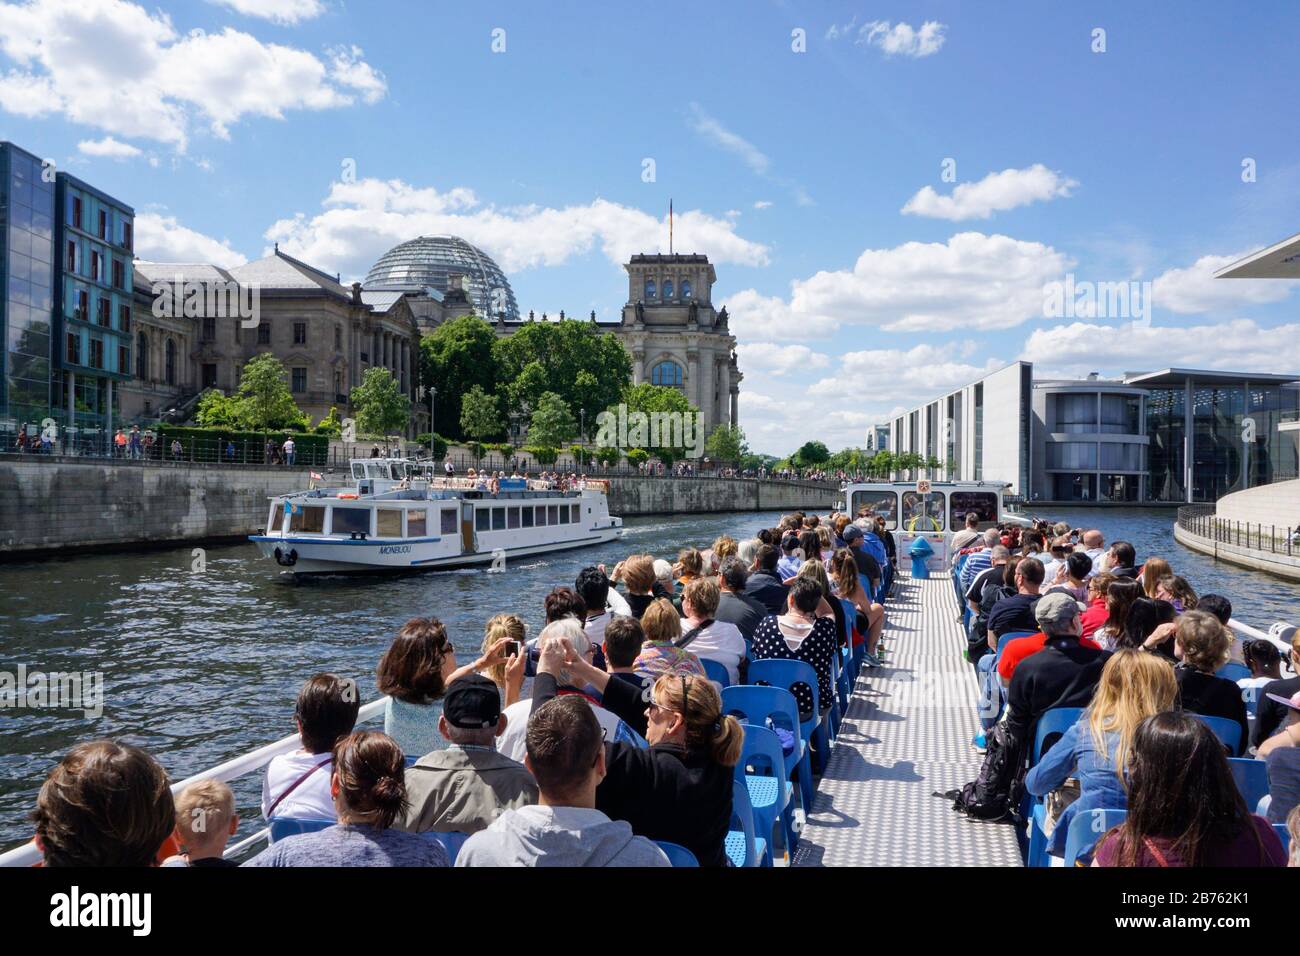 On 11.06.2016, tourists will look down on the Reichstag from a ship during a trip on the Spree River. [automated translation] Stock Photo